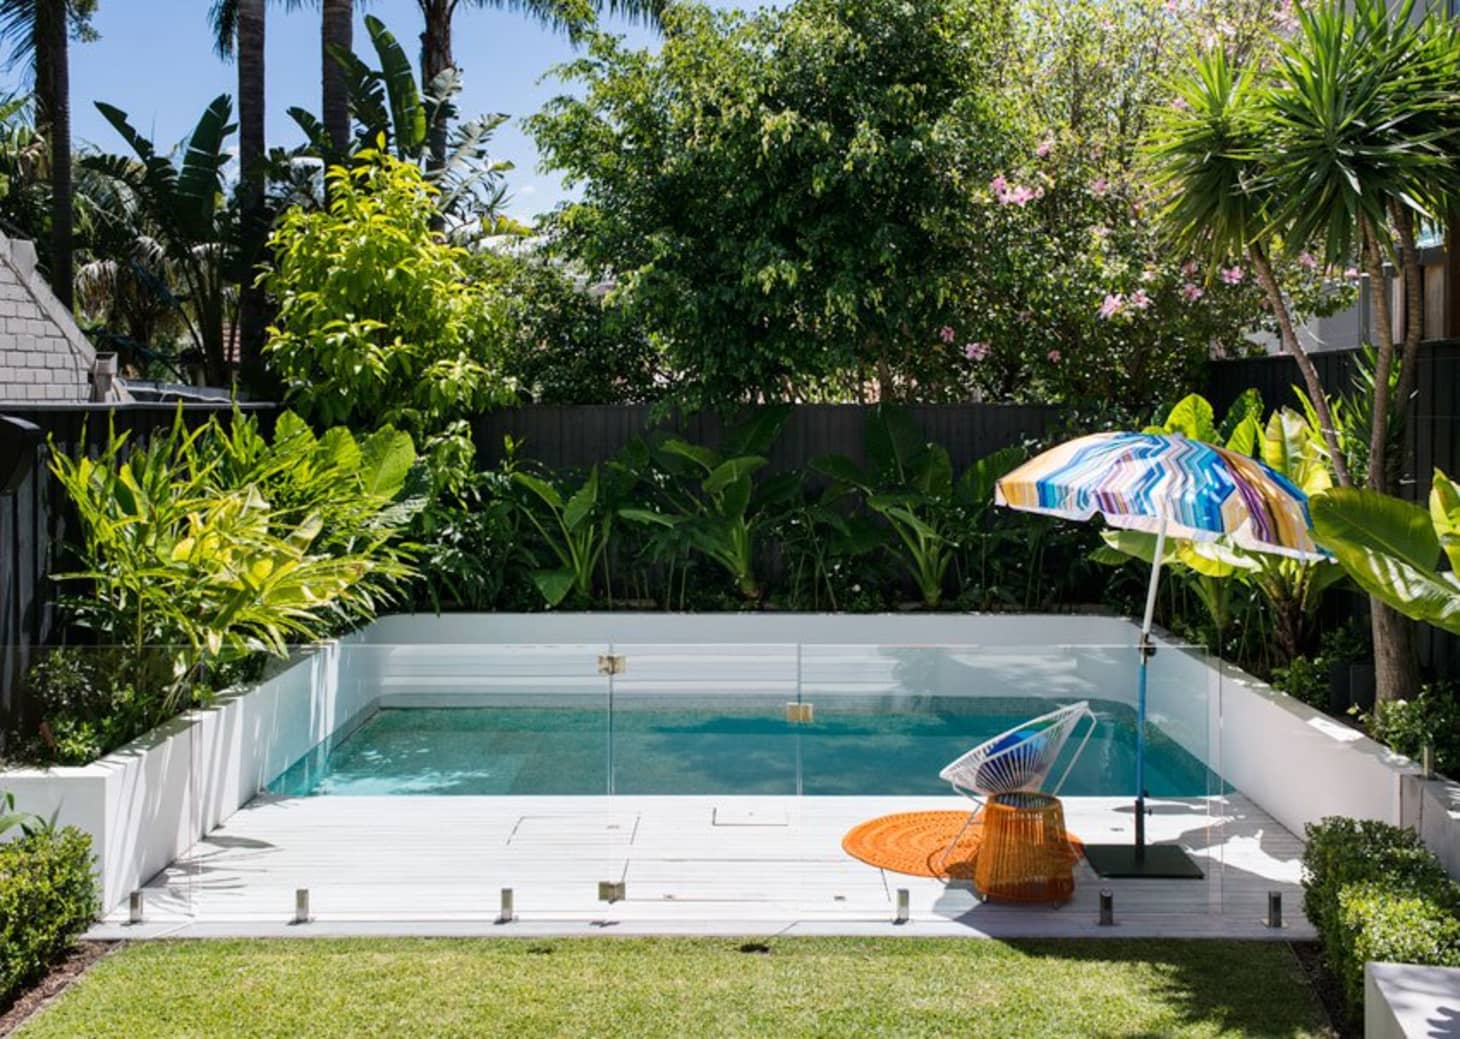 New Small Above Ground Pools For Small Yards for Small Space